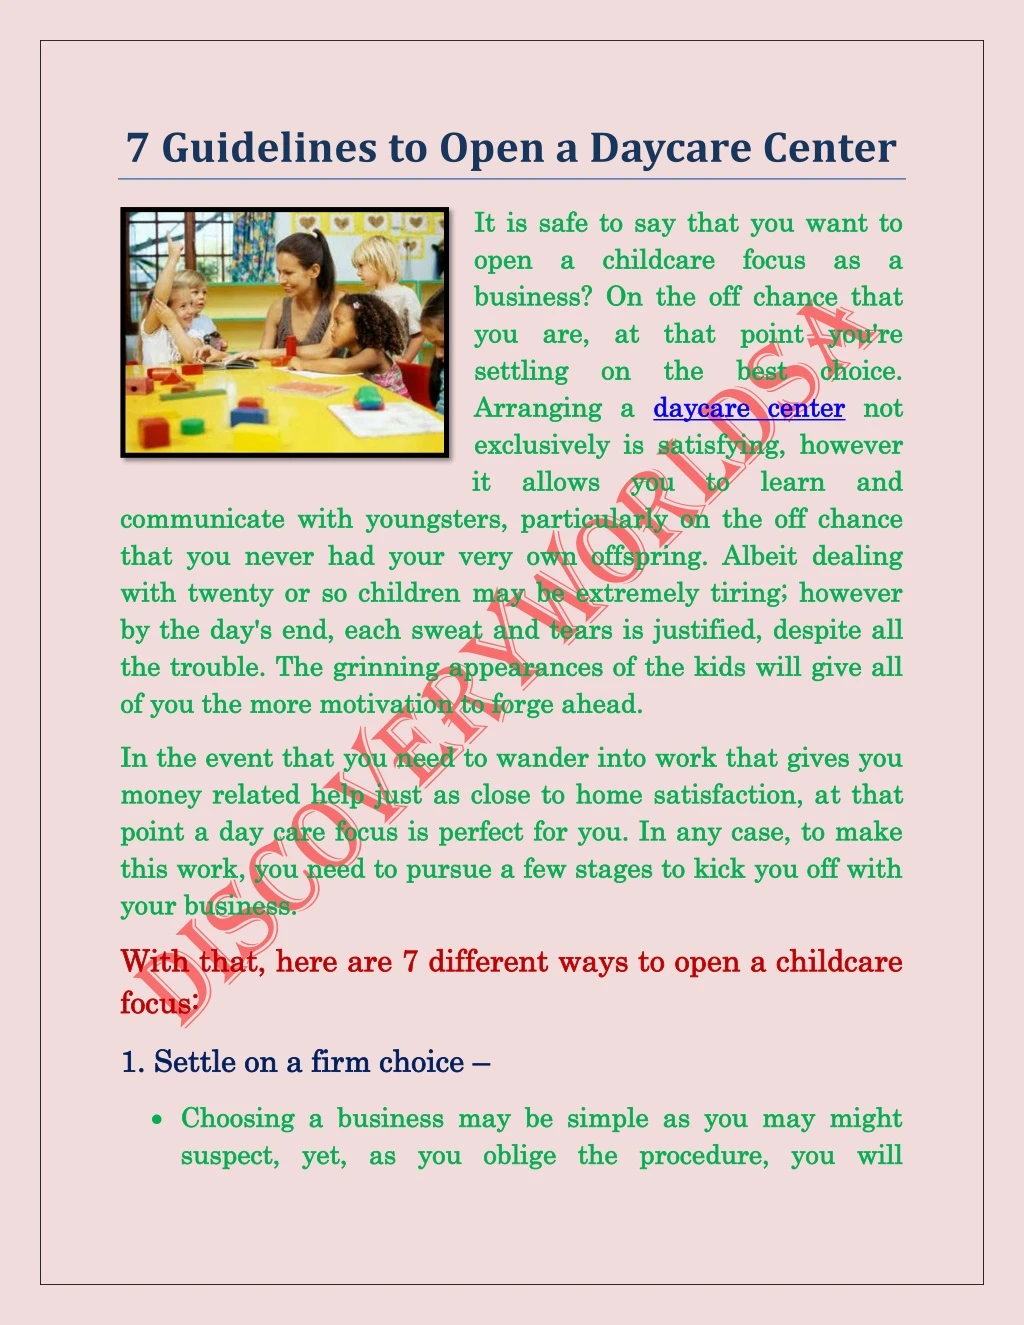 7 guidelines to open a daycare center